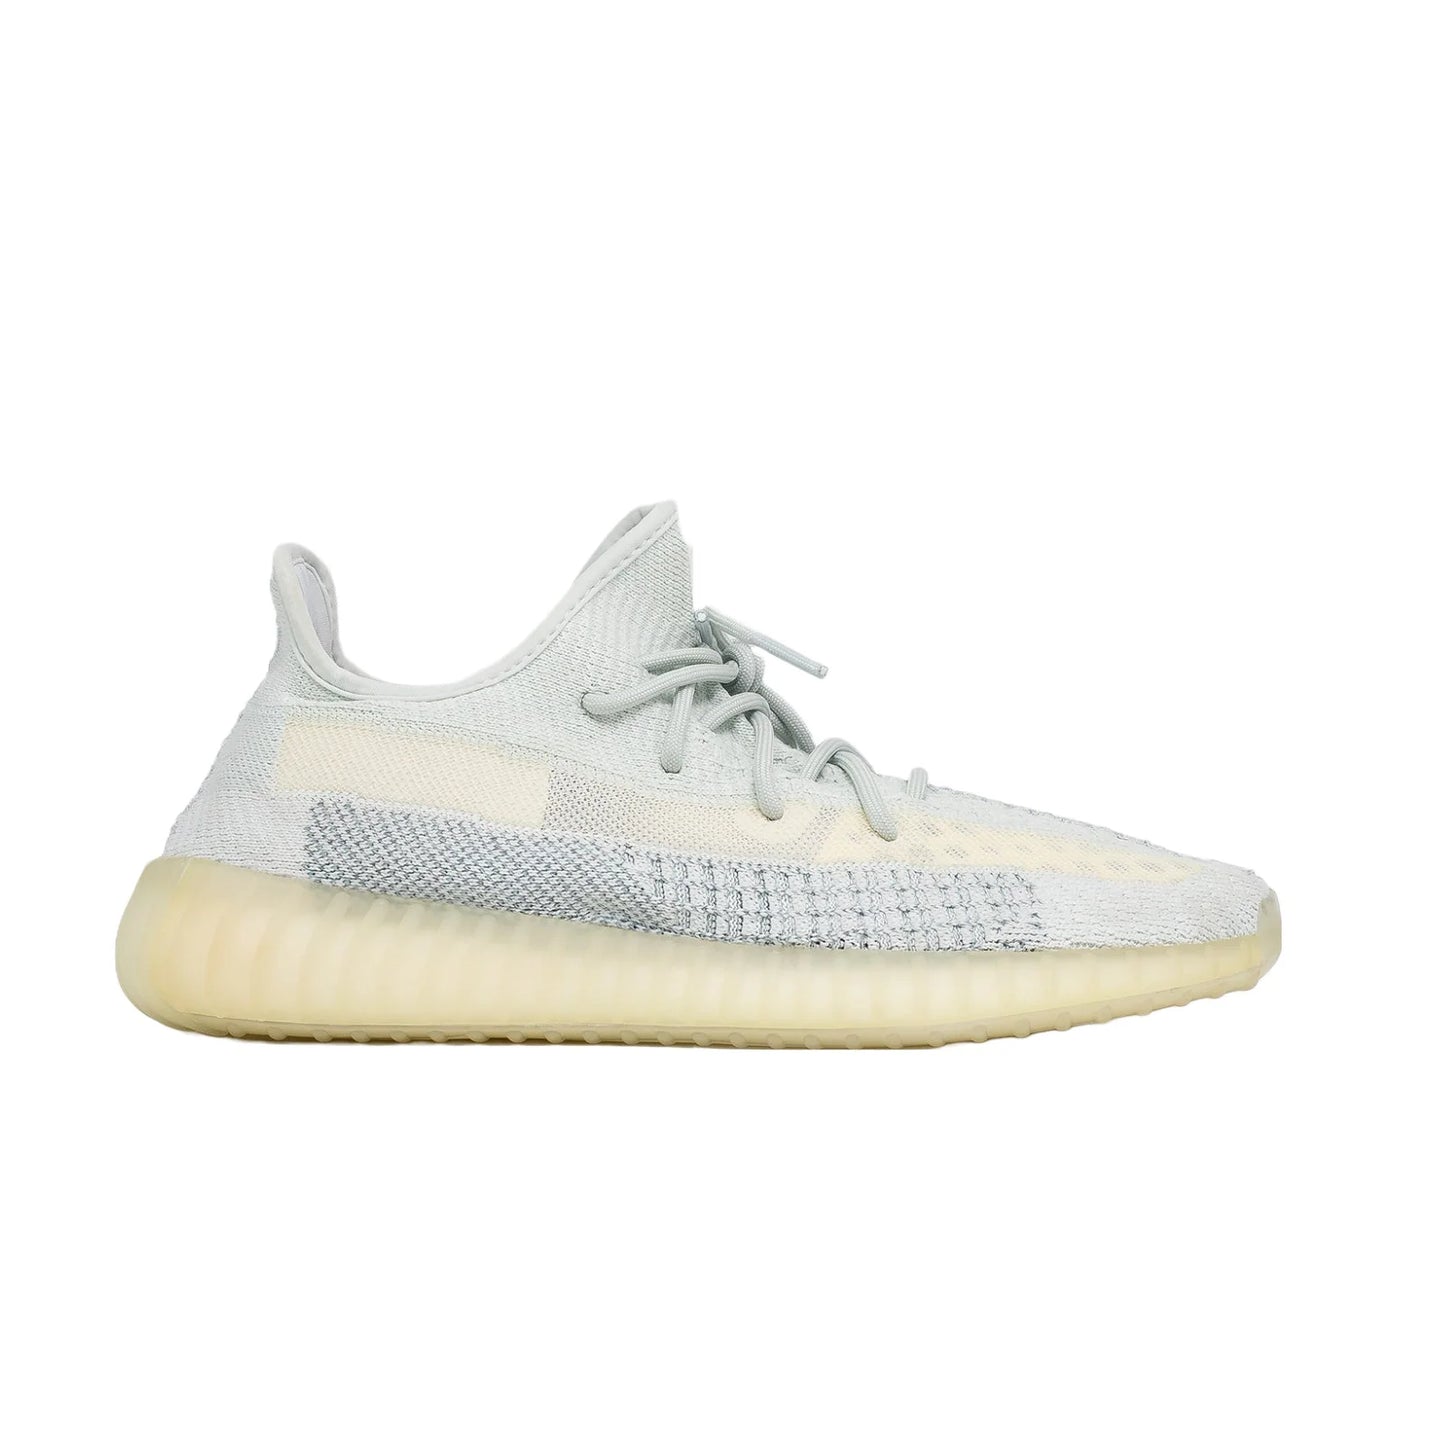 Yeezy Boost 350 V2, Cloud White (Non-Reflective)